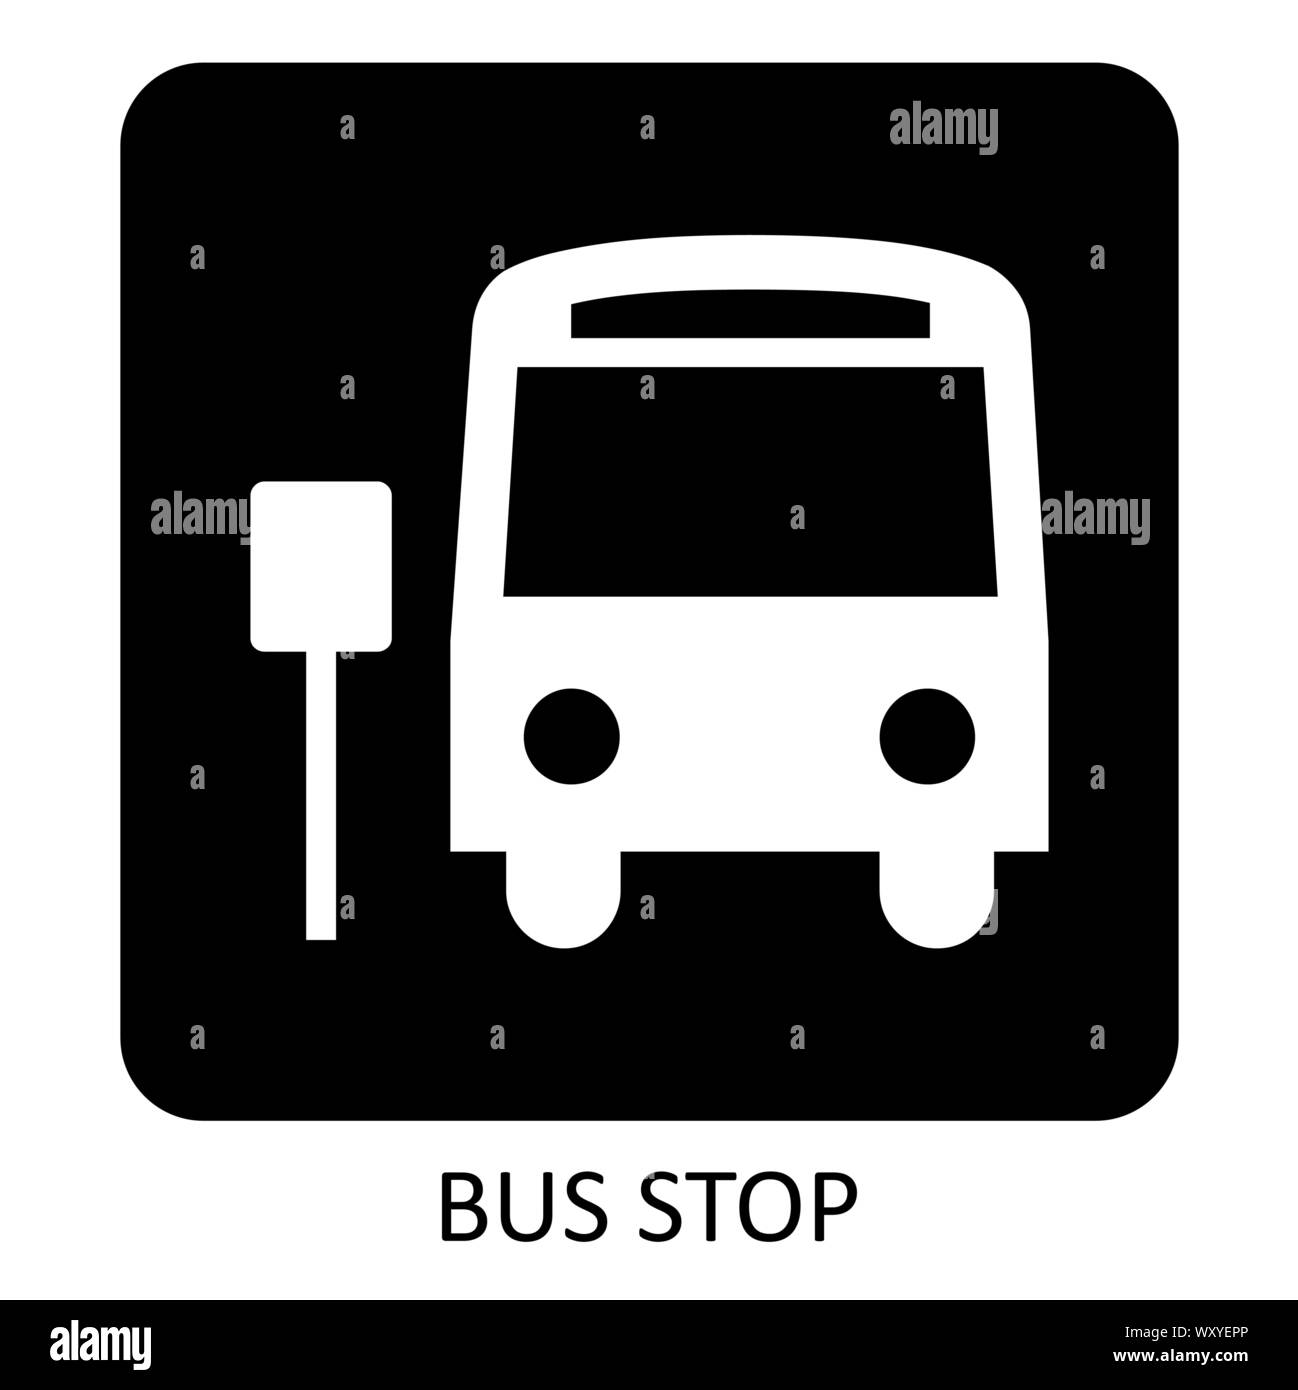 Bus Stop icon illustration Stock Vector